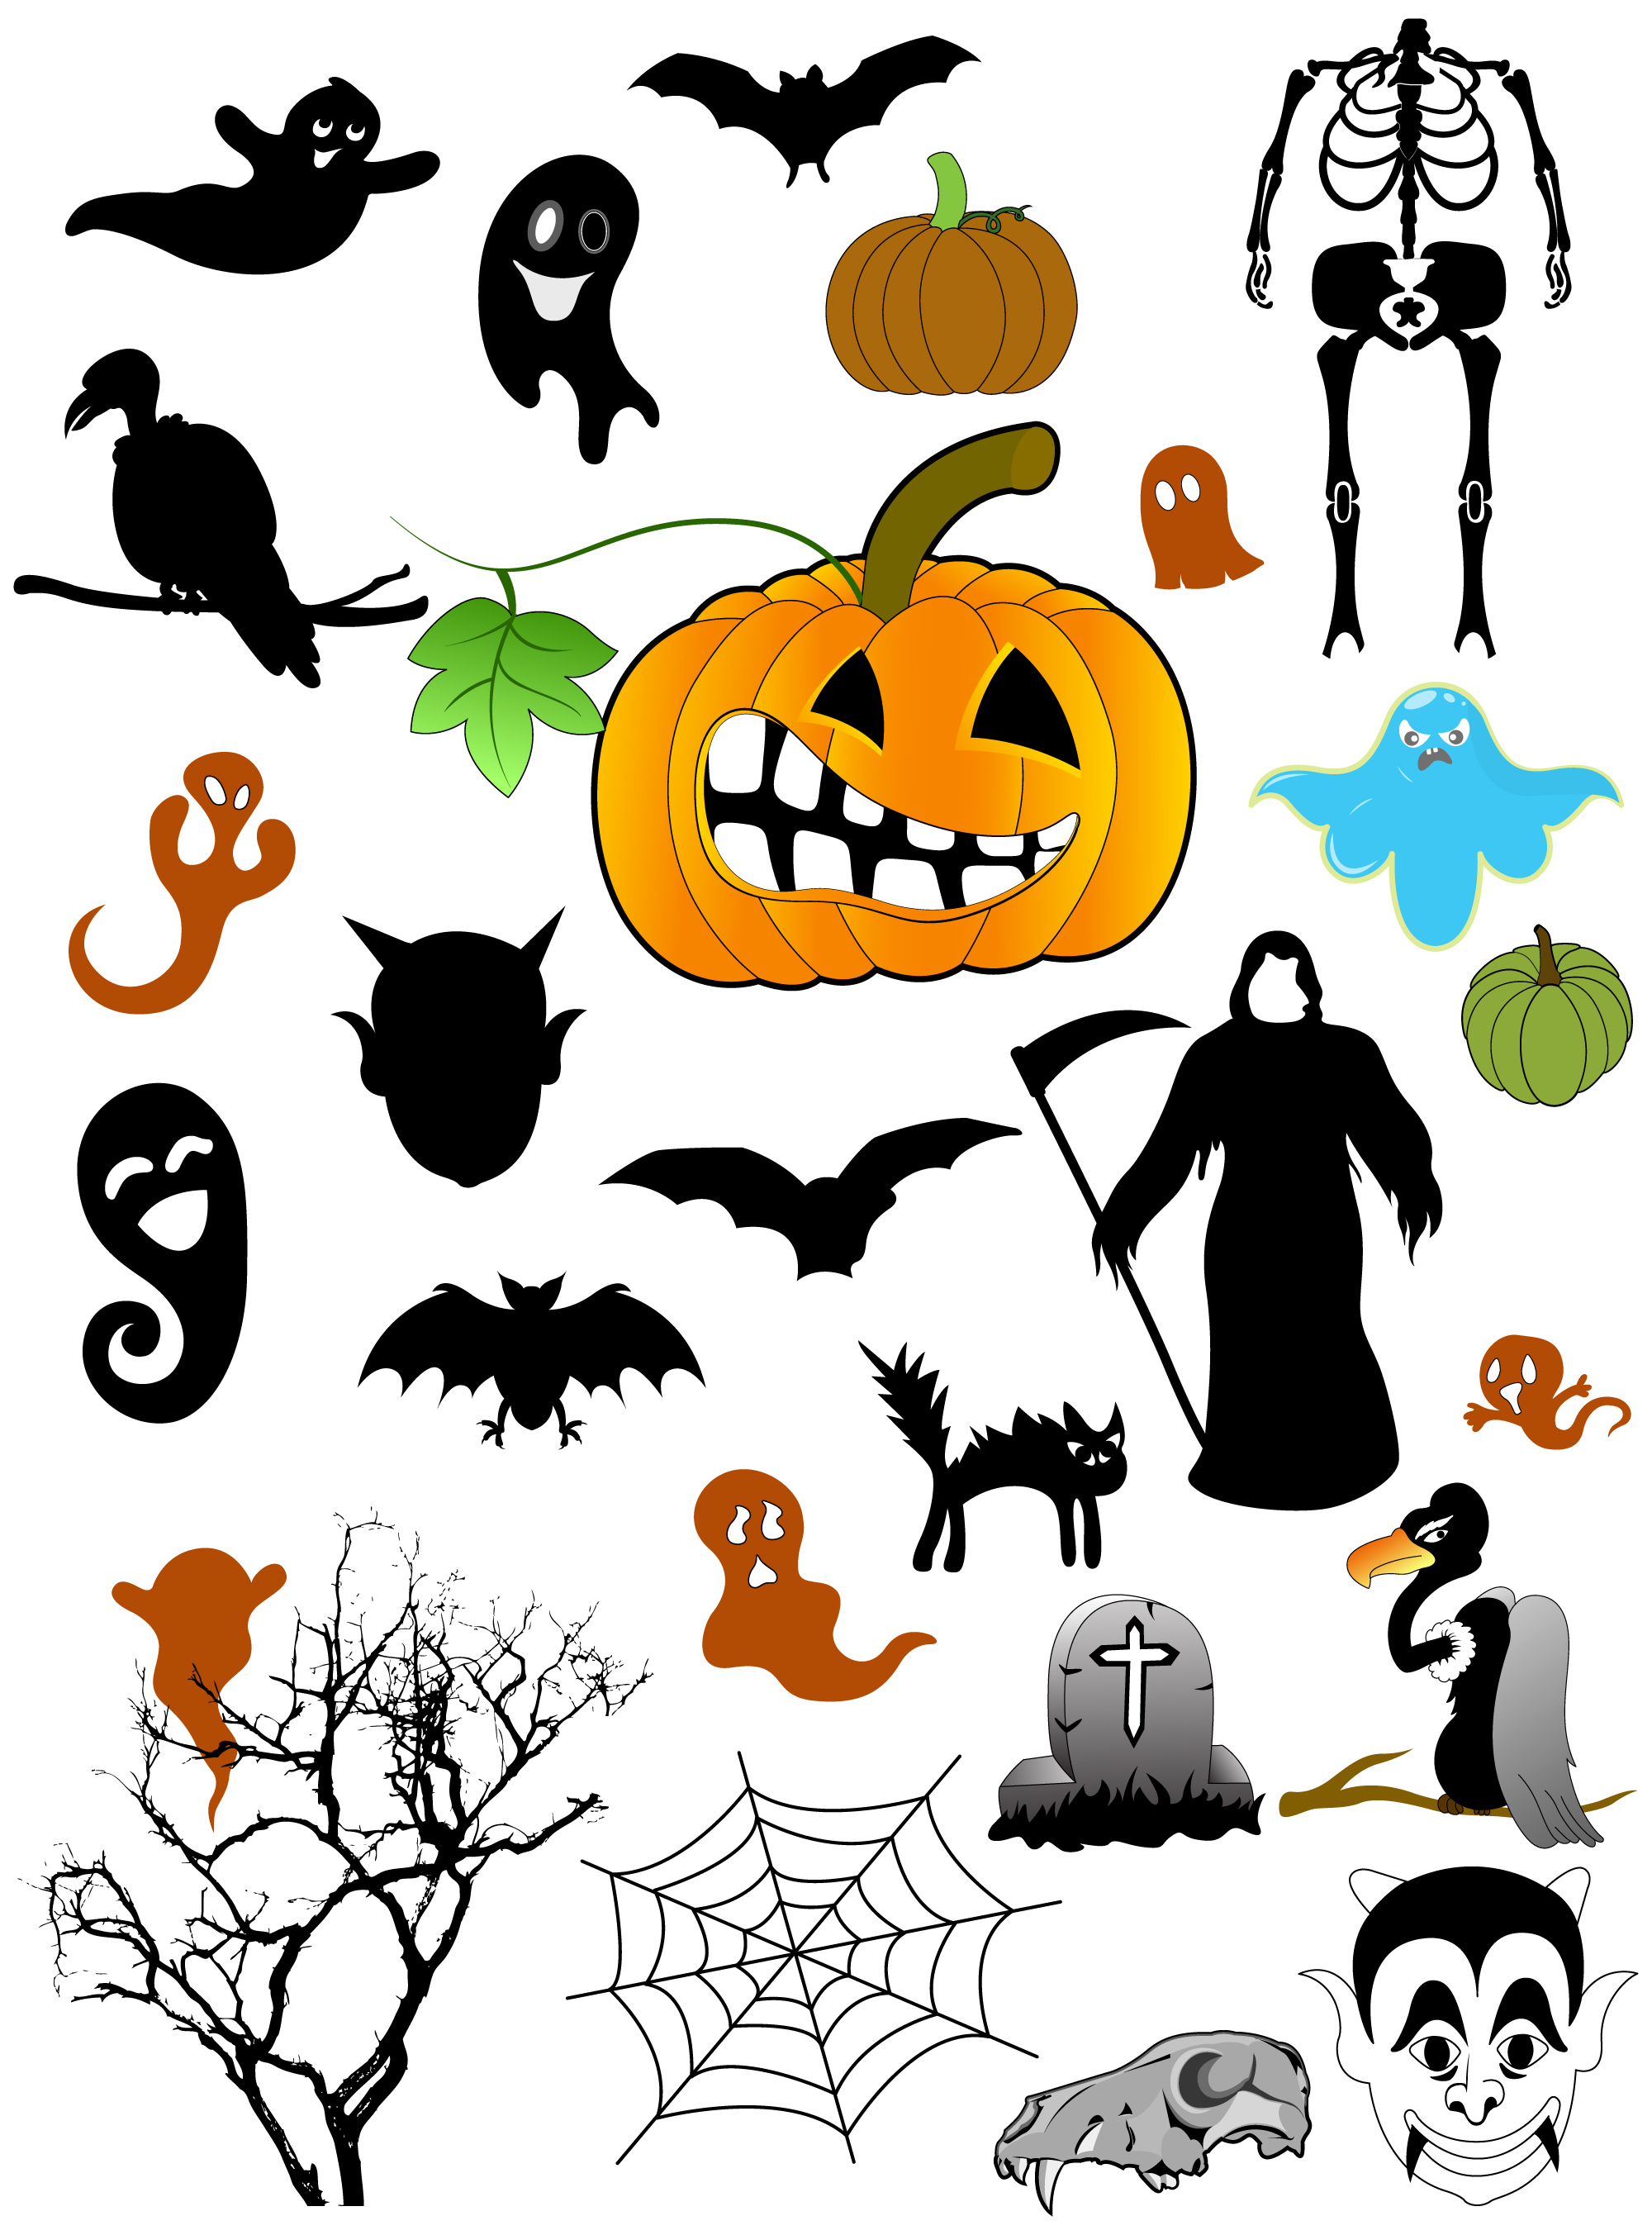 Clip Arts Related To : halloween house drawing silhouettes. view all Free H...